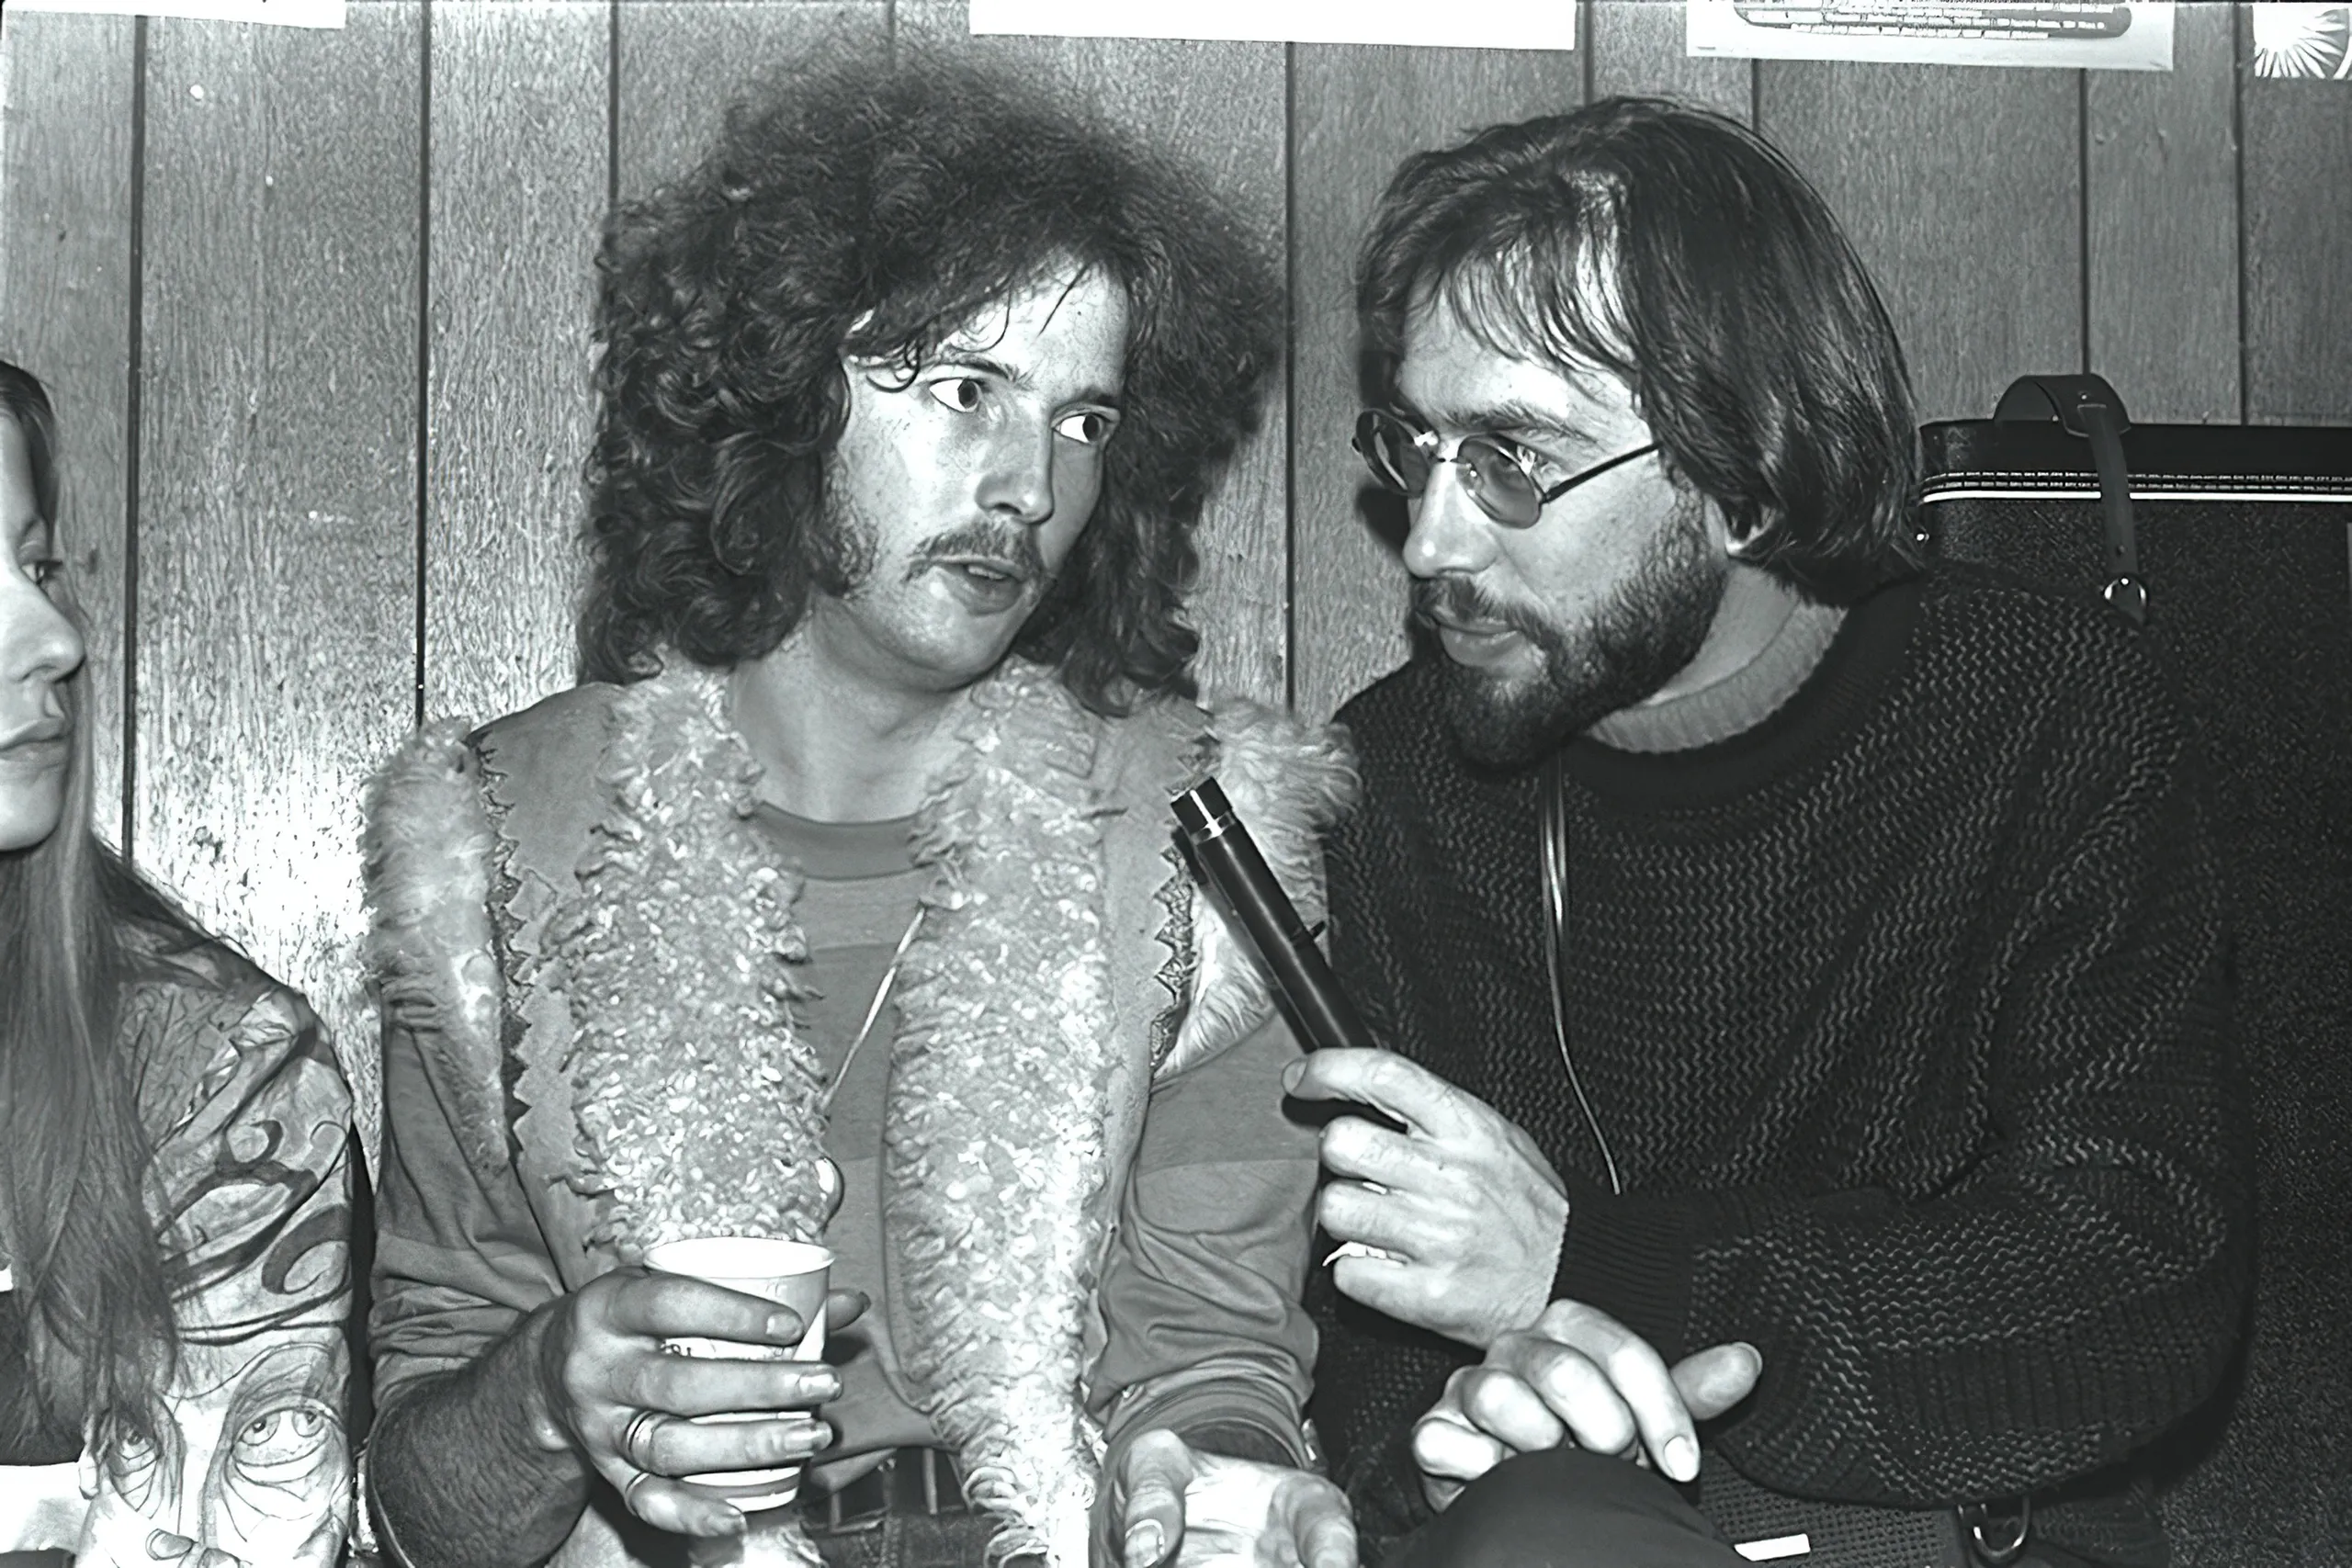 Cream Eric Clapton interviewed by Ted Lucas backstage 3